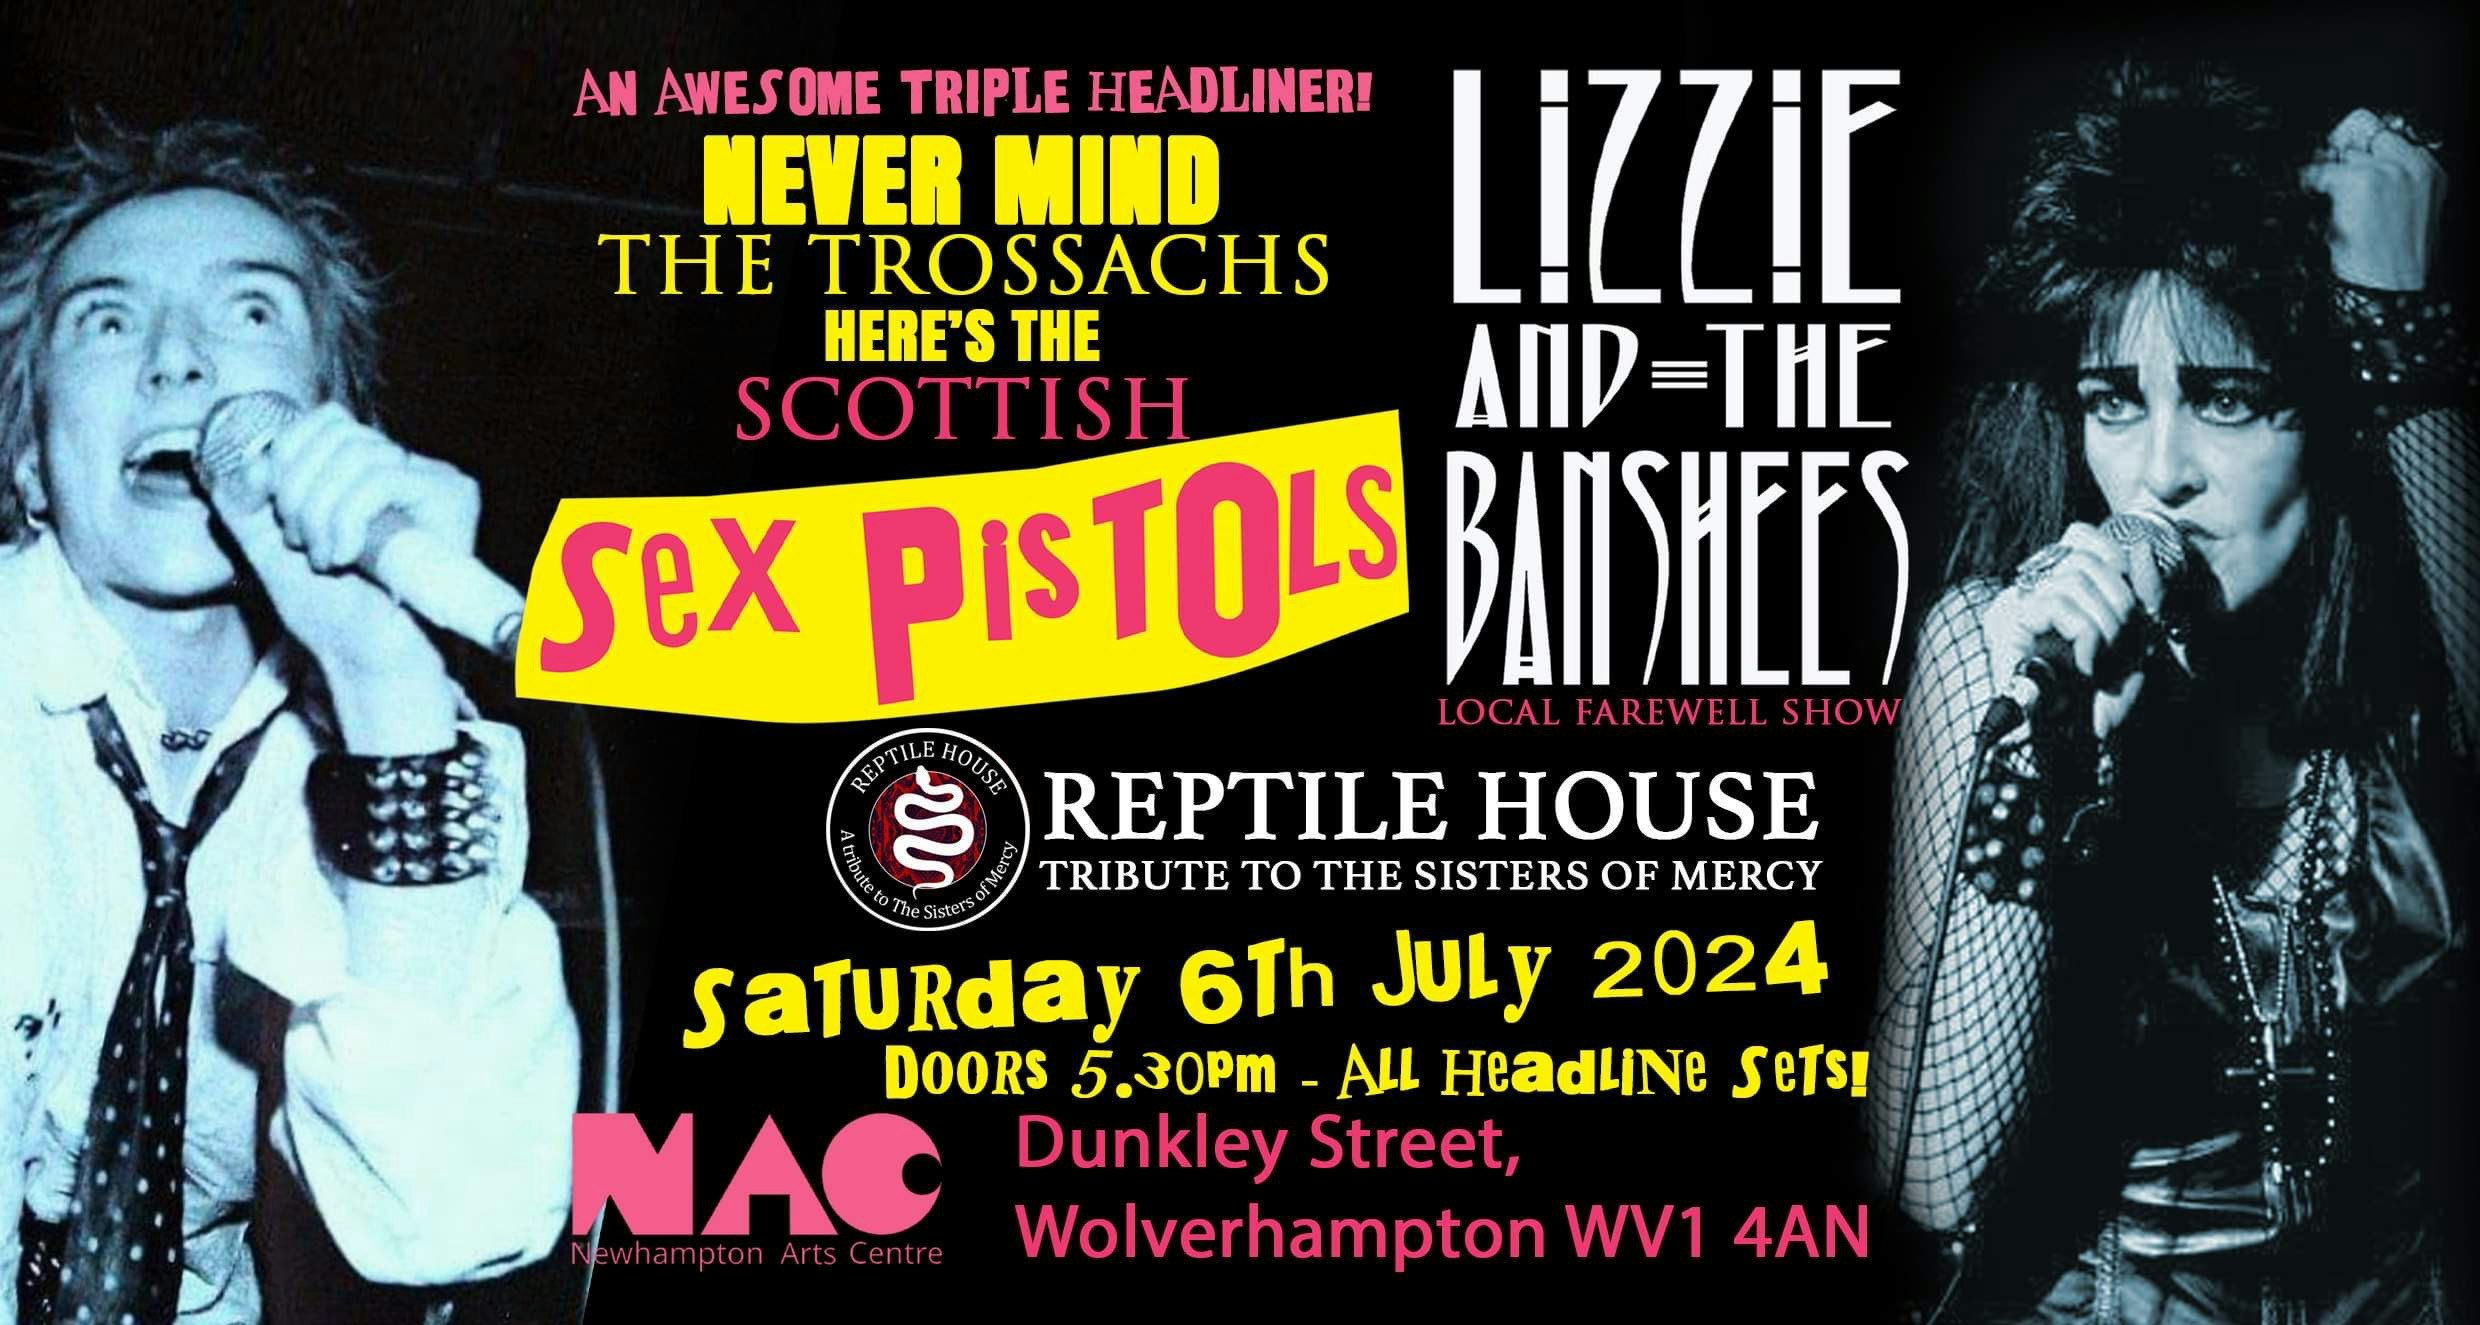 AN AWESOME TRIPLE HEADLINER! – THE SCOTTISH SEX PISTOLS + LIZZIE & THE BANSHEES & REPTILE HOUSE (Sisters Of Mercy Tribute)